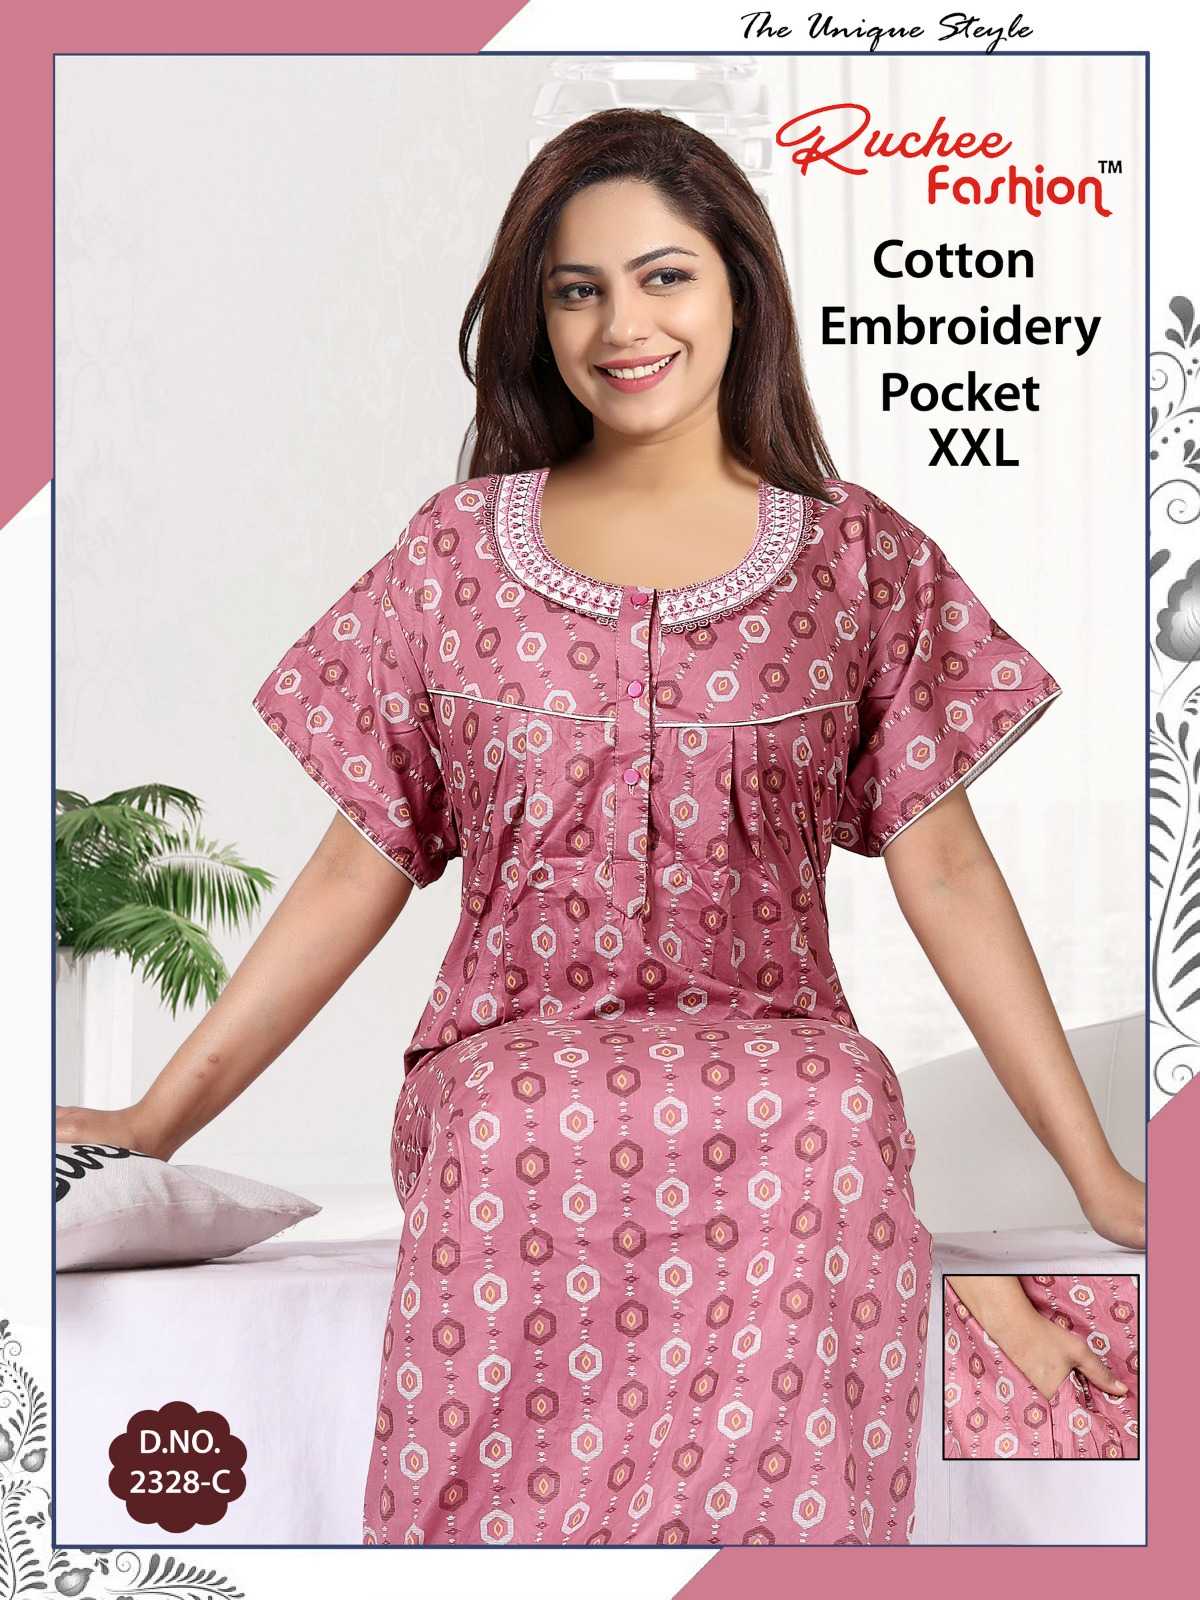 ruchee fashion cotton embroidery pocket part 3 comfy night gown